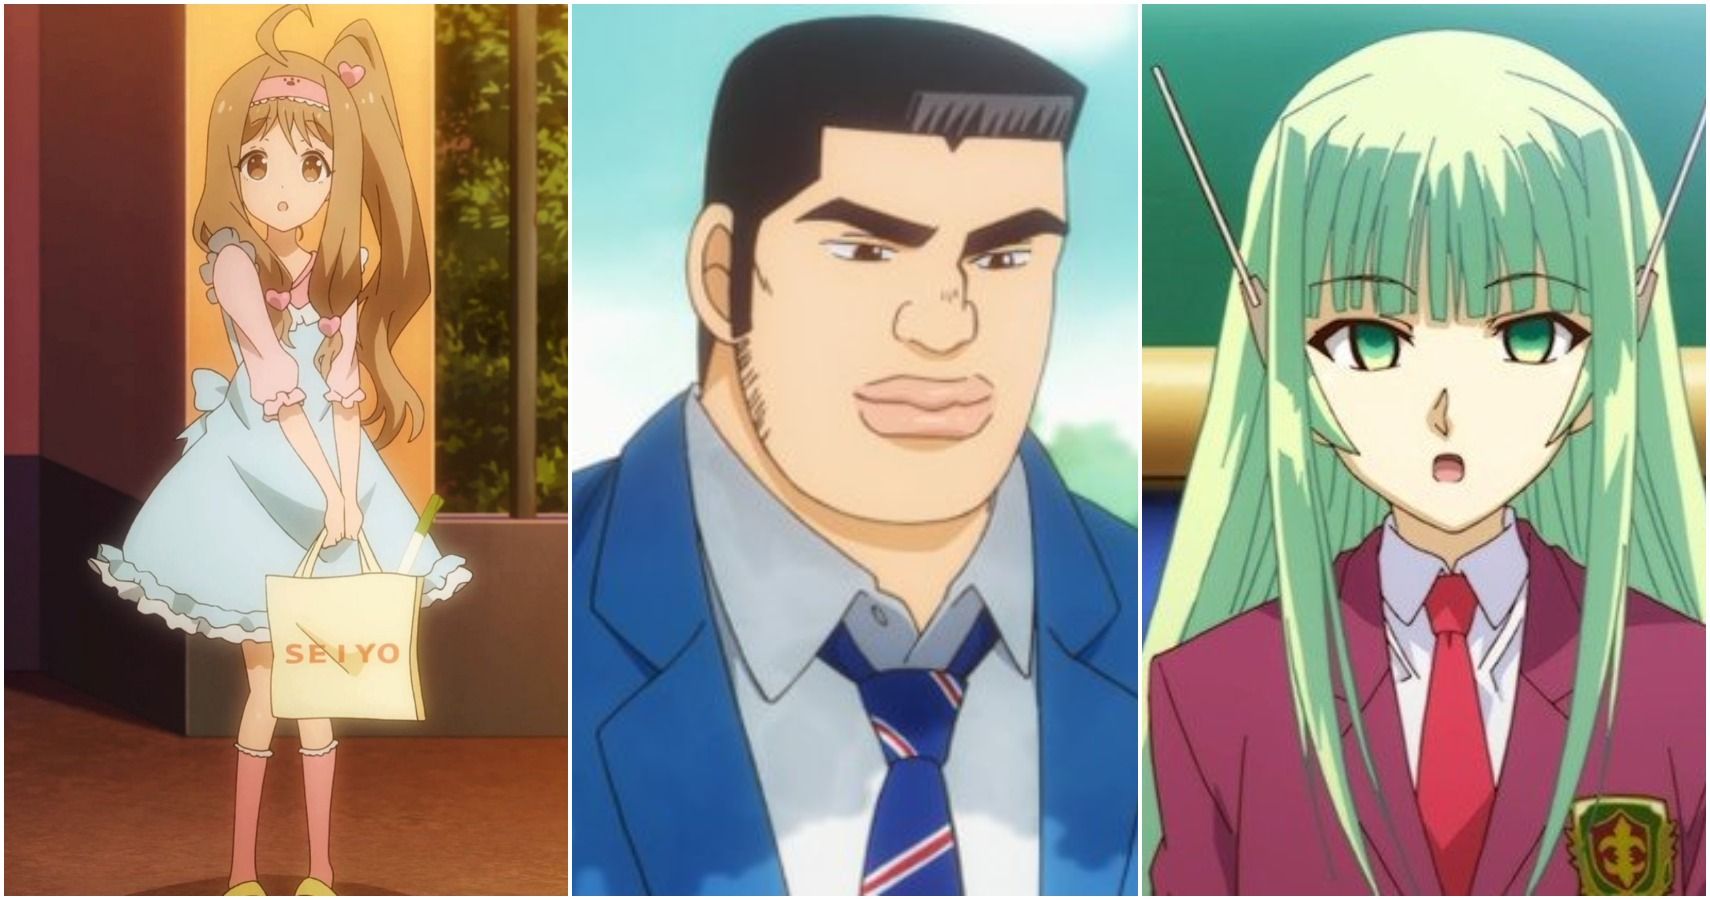 Characters appearing in GATE Anime